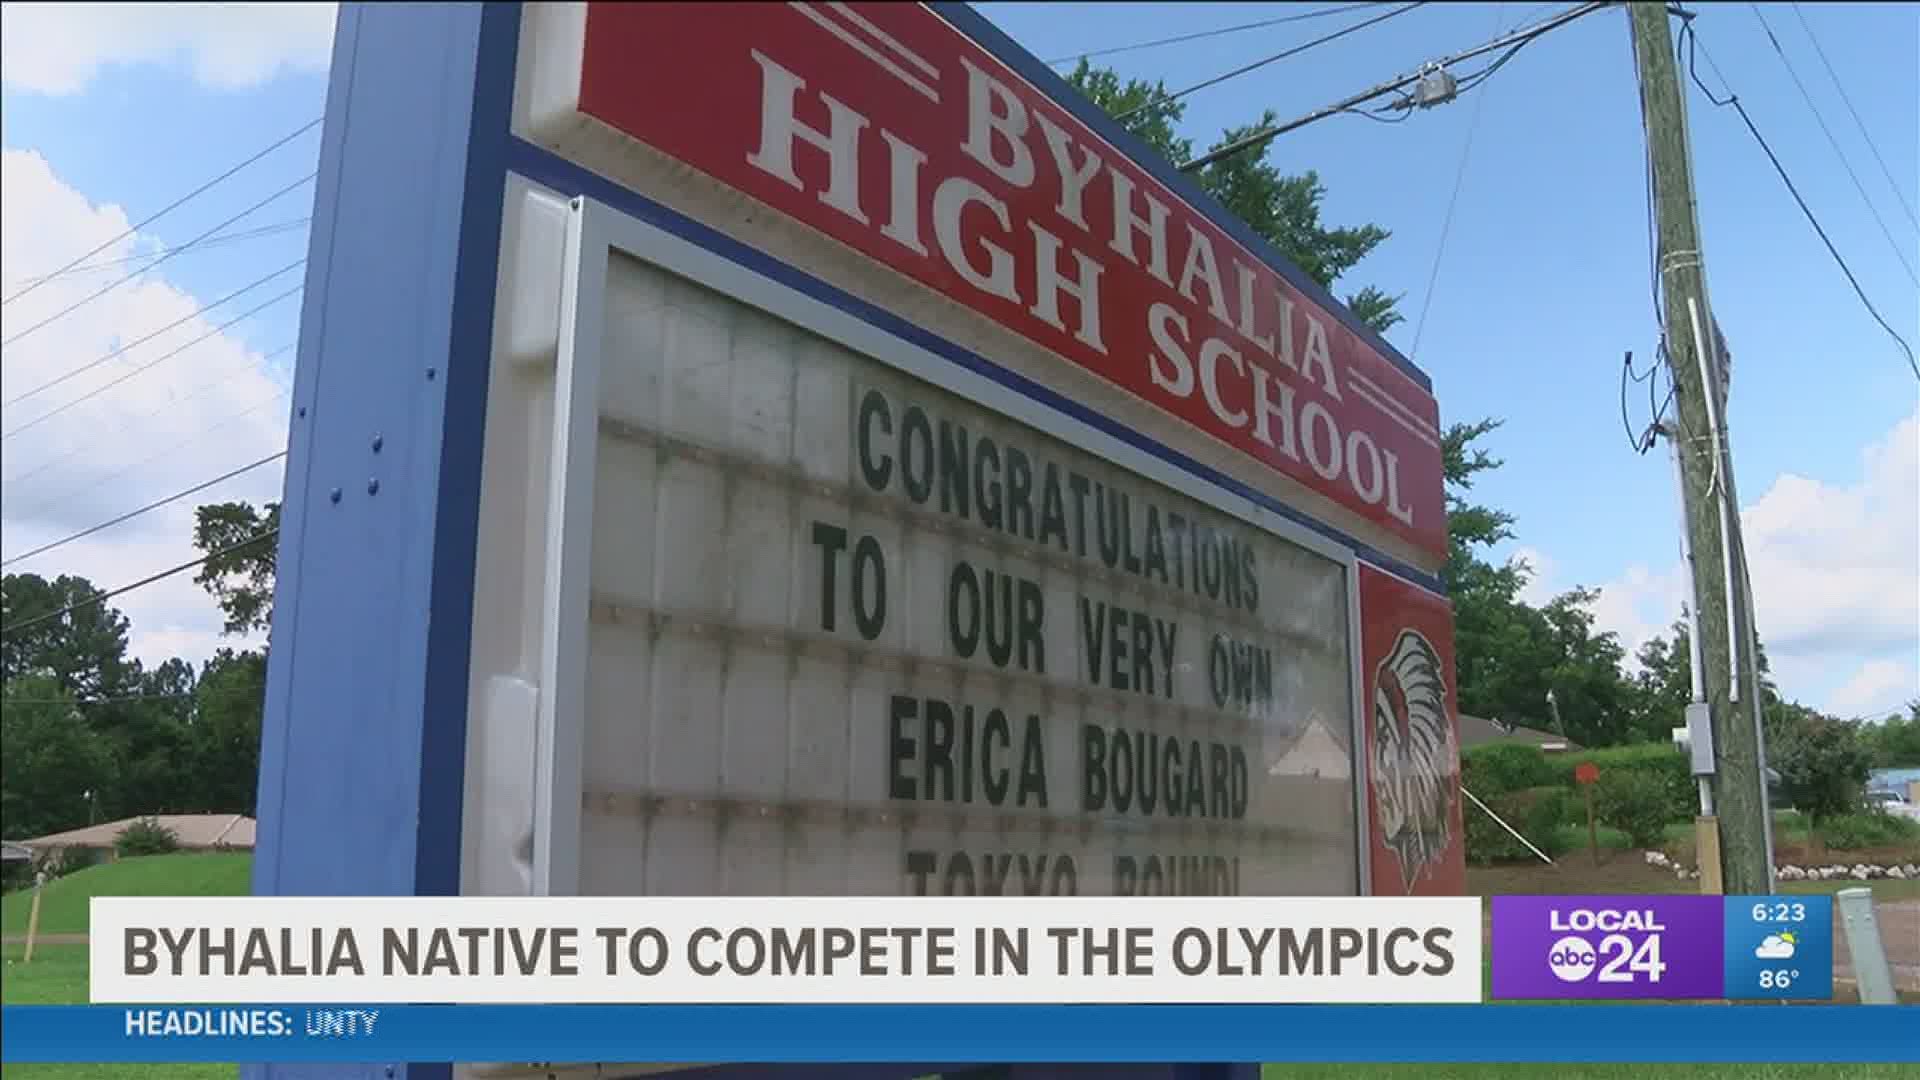 Local track star Erica Bougard is competing in the heptathlon at the Tokyo games.